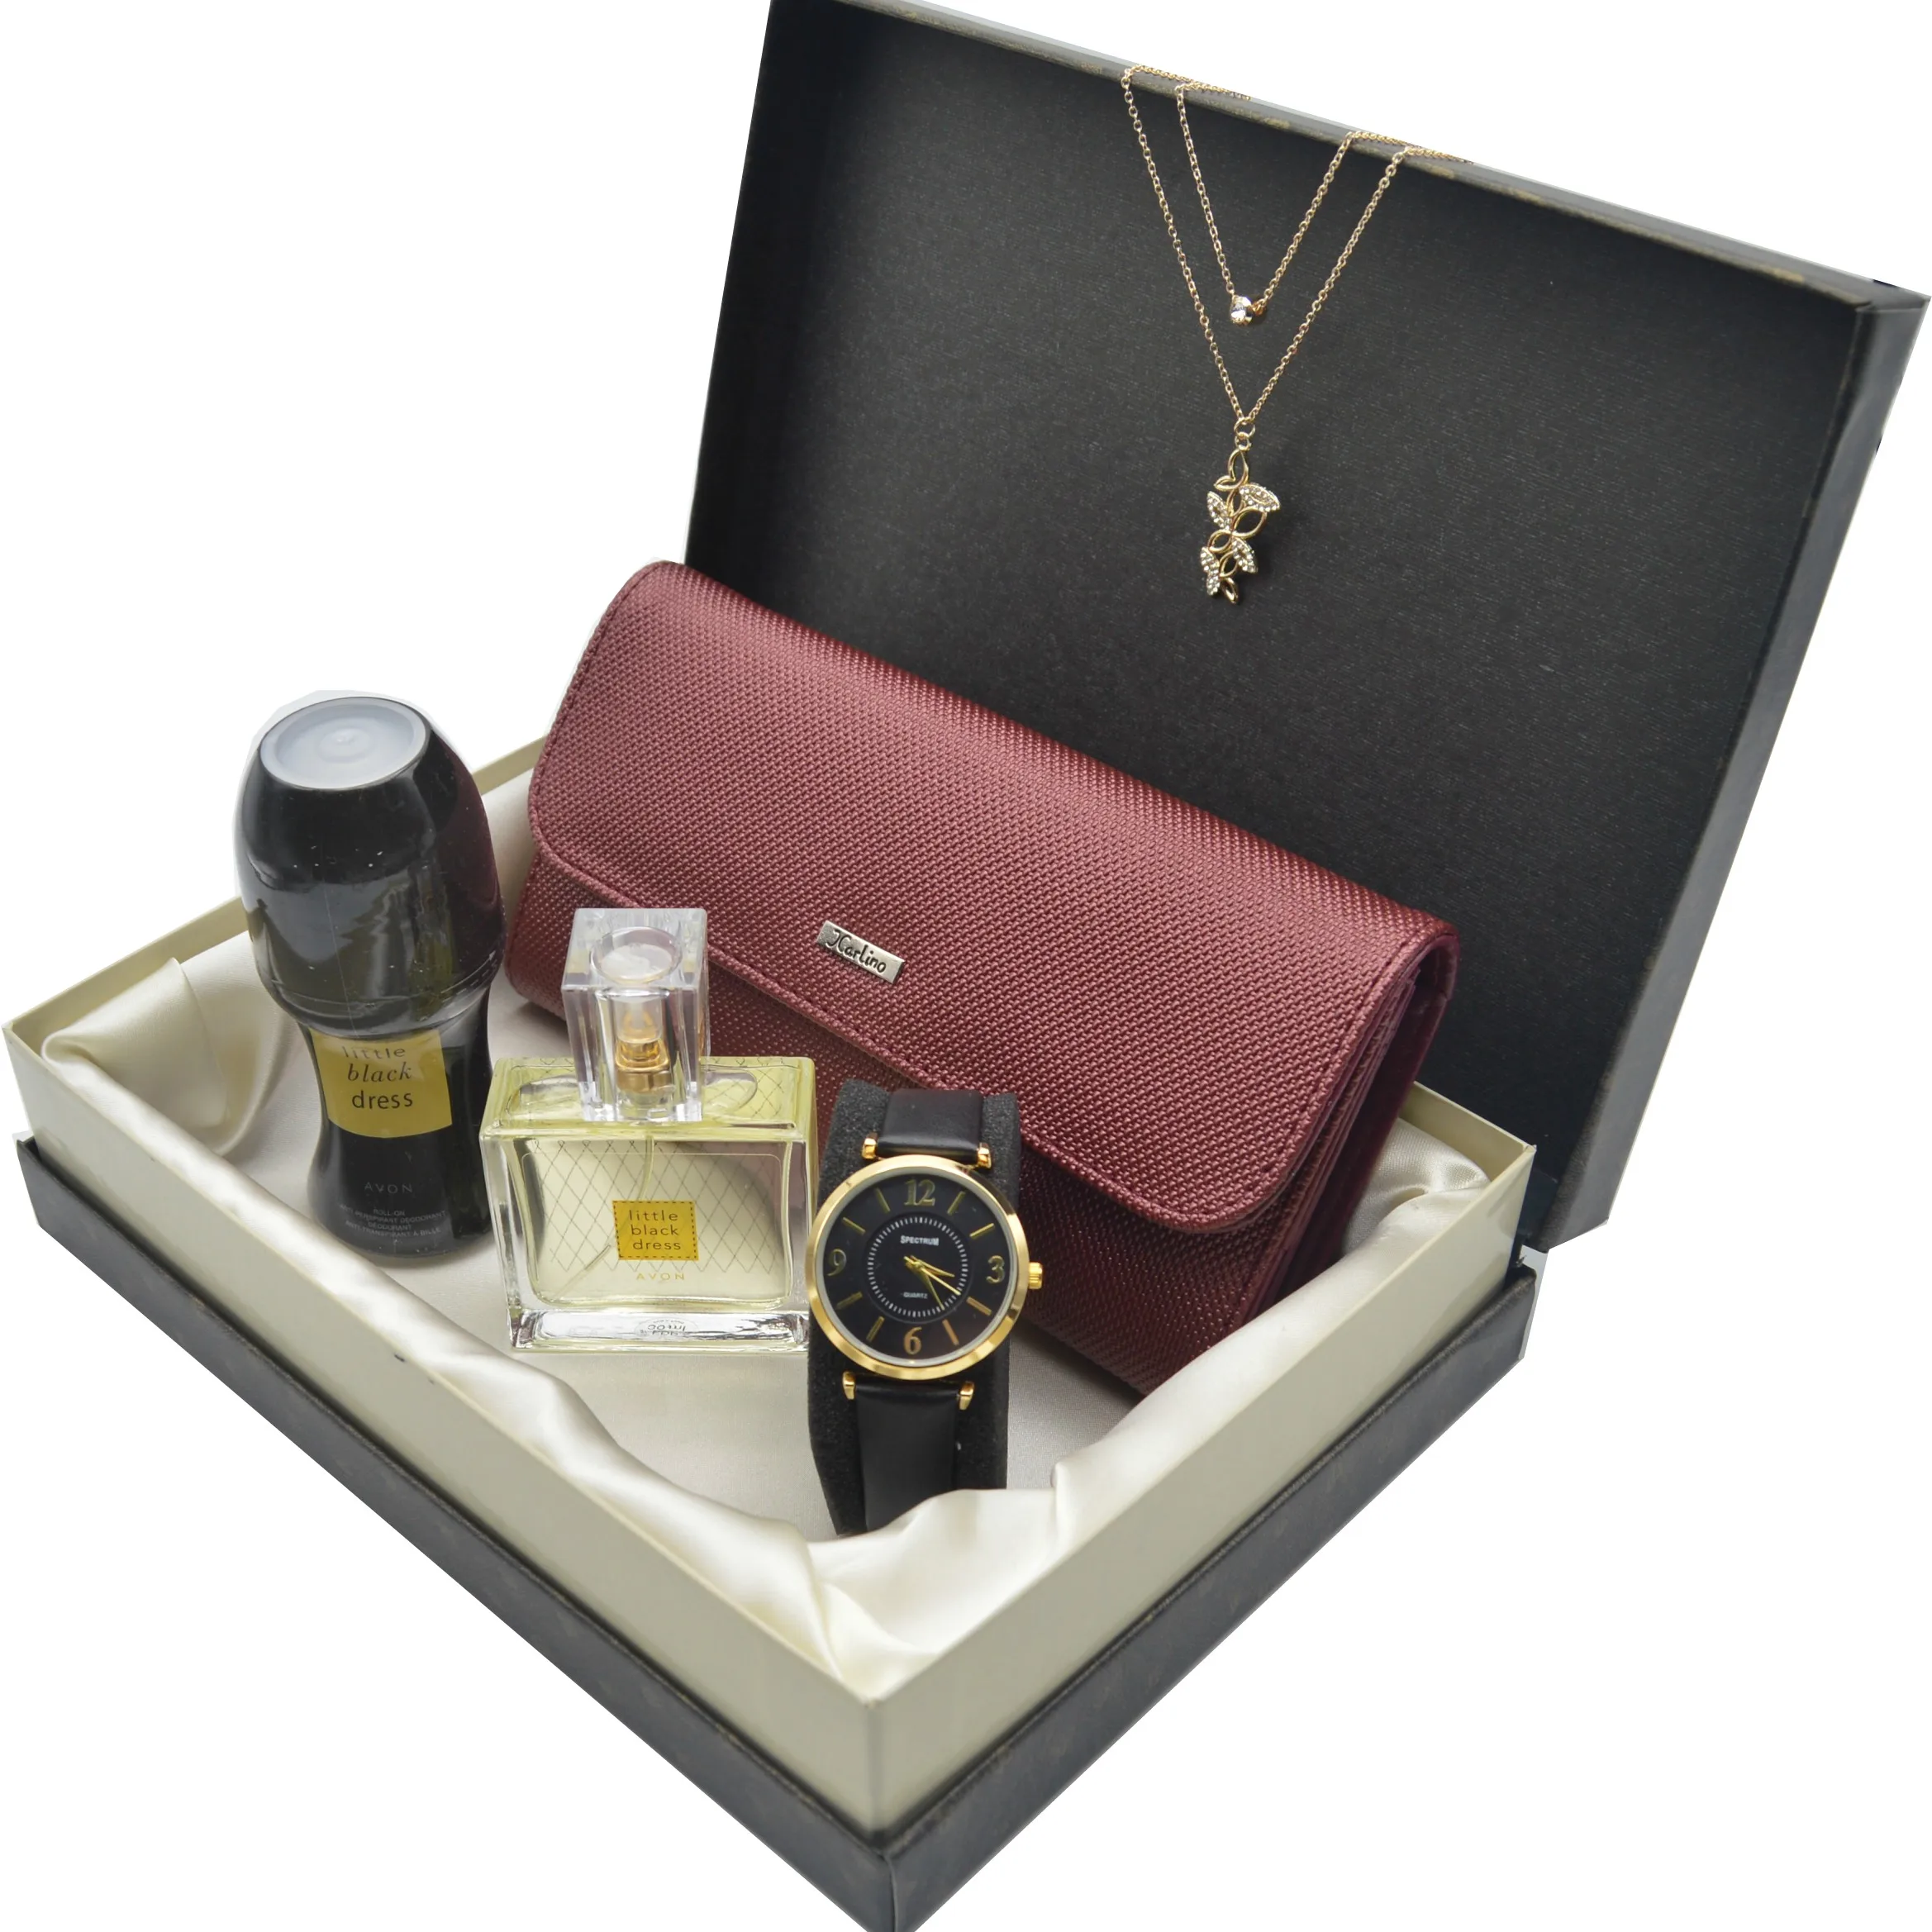 Wallet Gift Set - AVON Perfume + Leather Wallet + Watch + Necklace